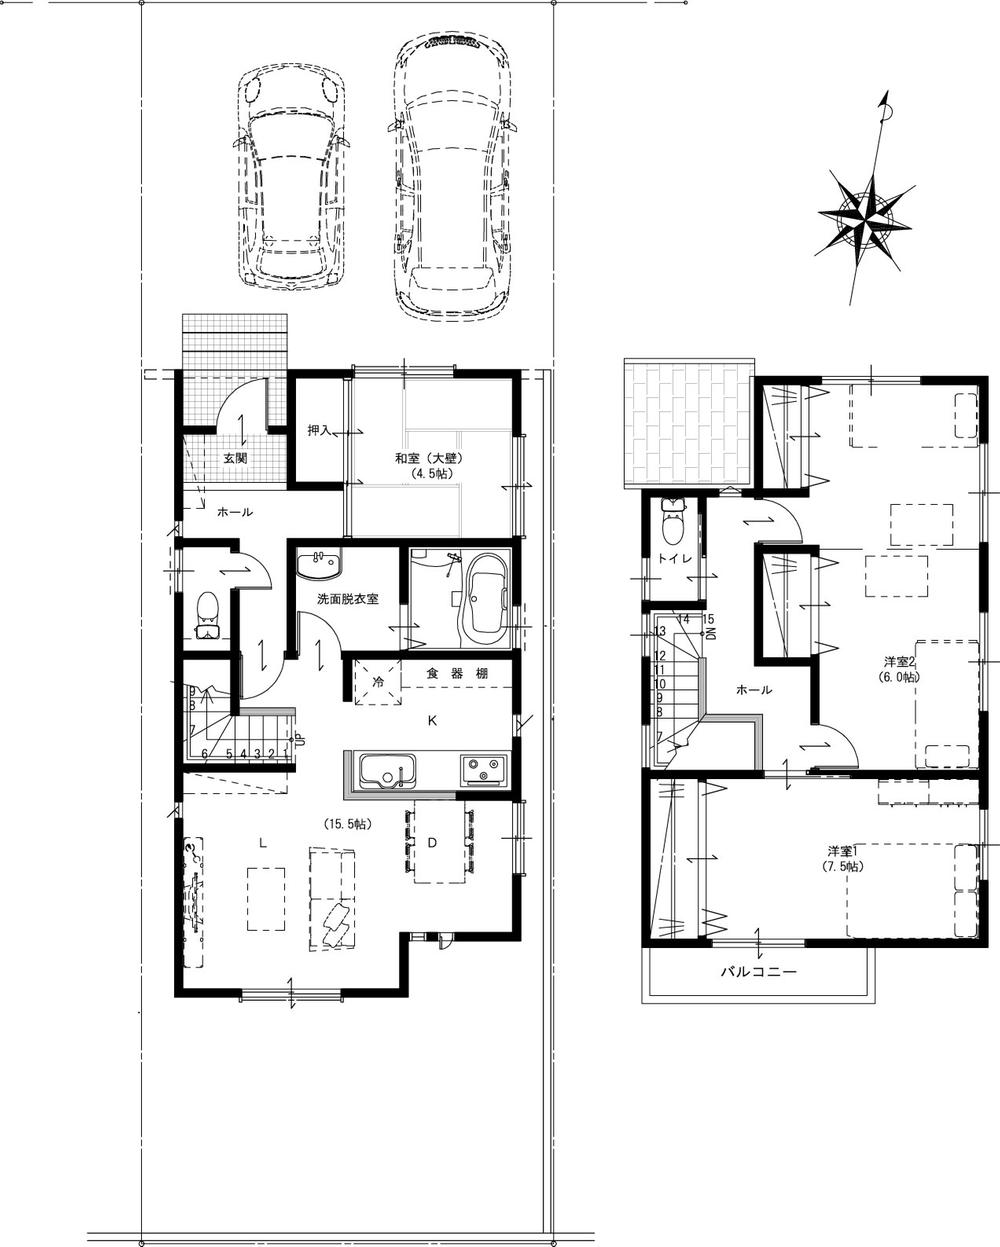 Other building plan example. Building plan example (C partition) Building price 13,980,000 yen (tax included), Building area 102.71 sq m